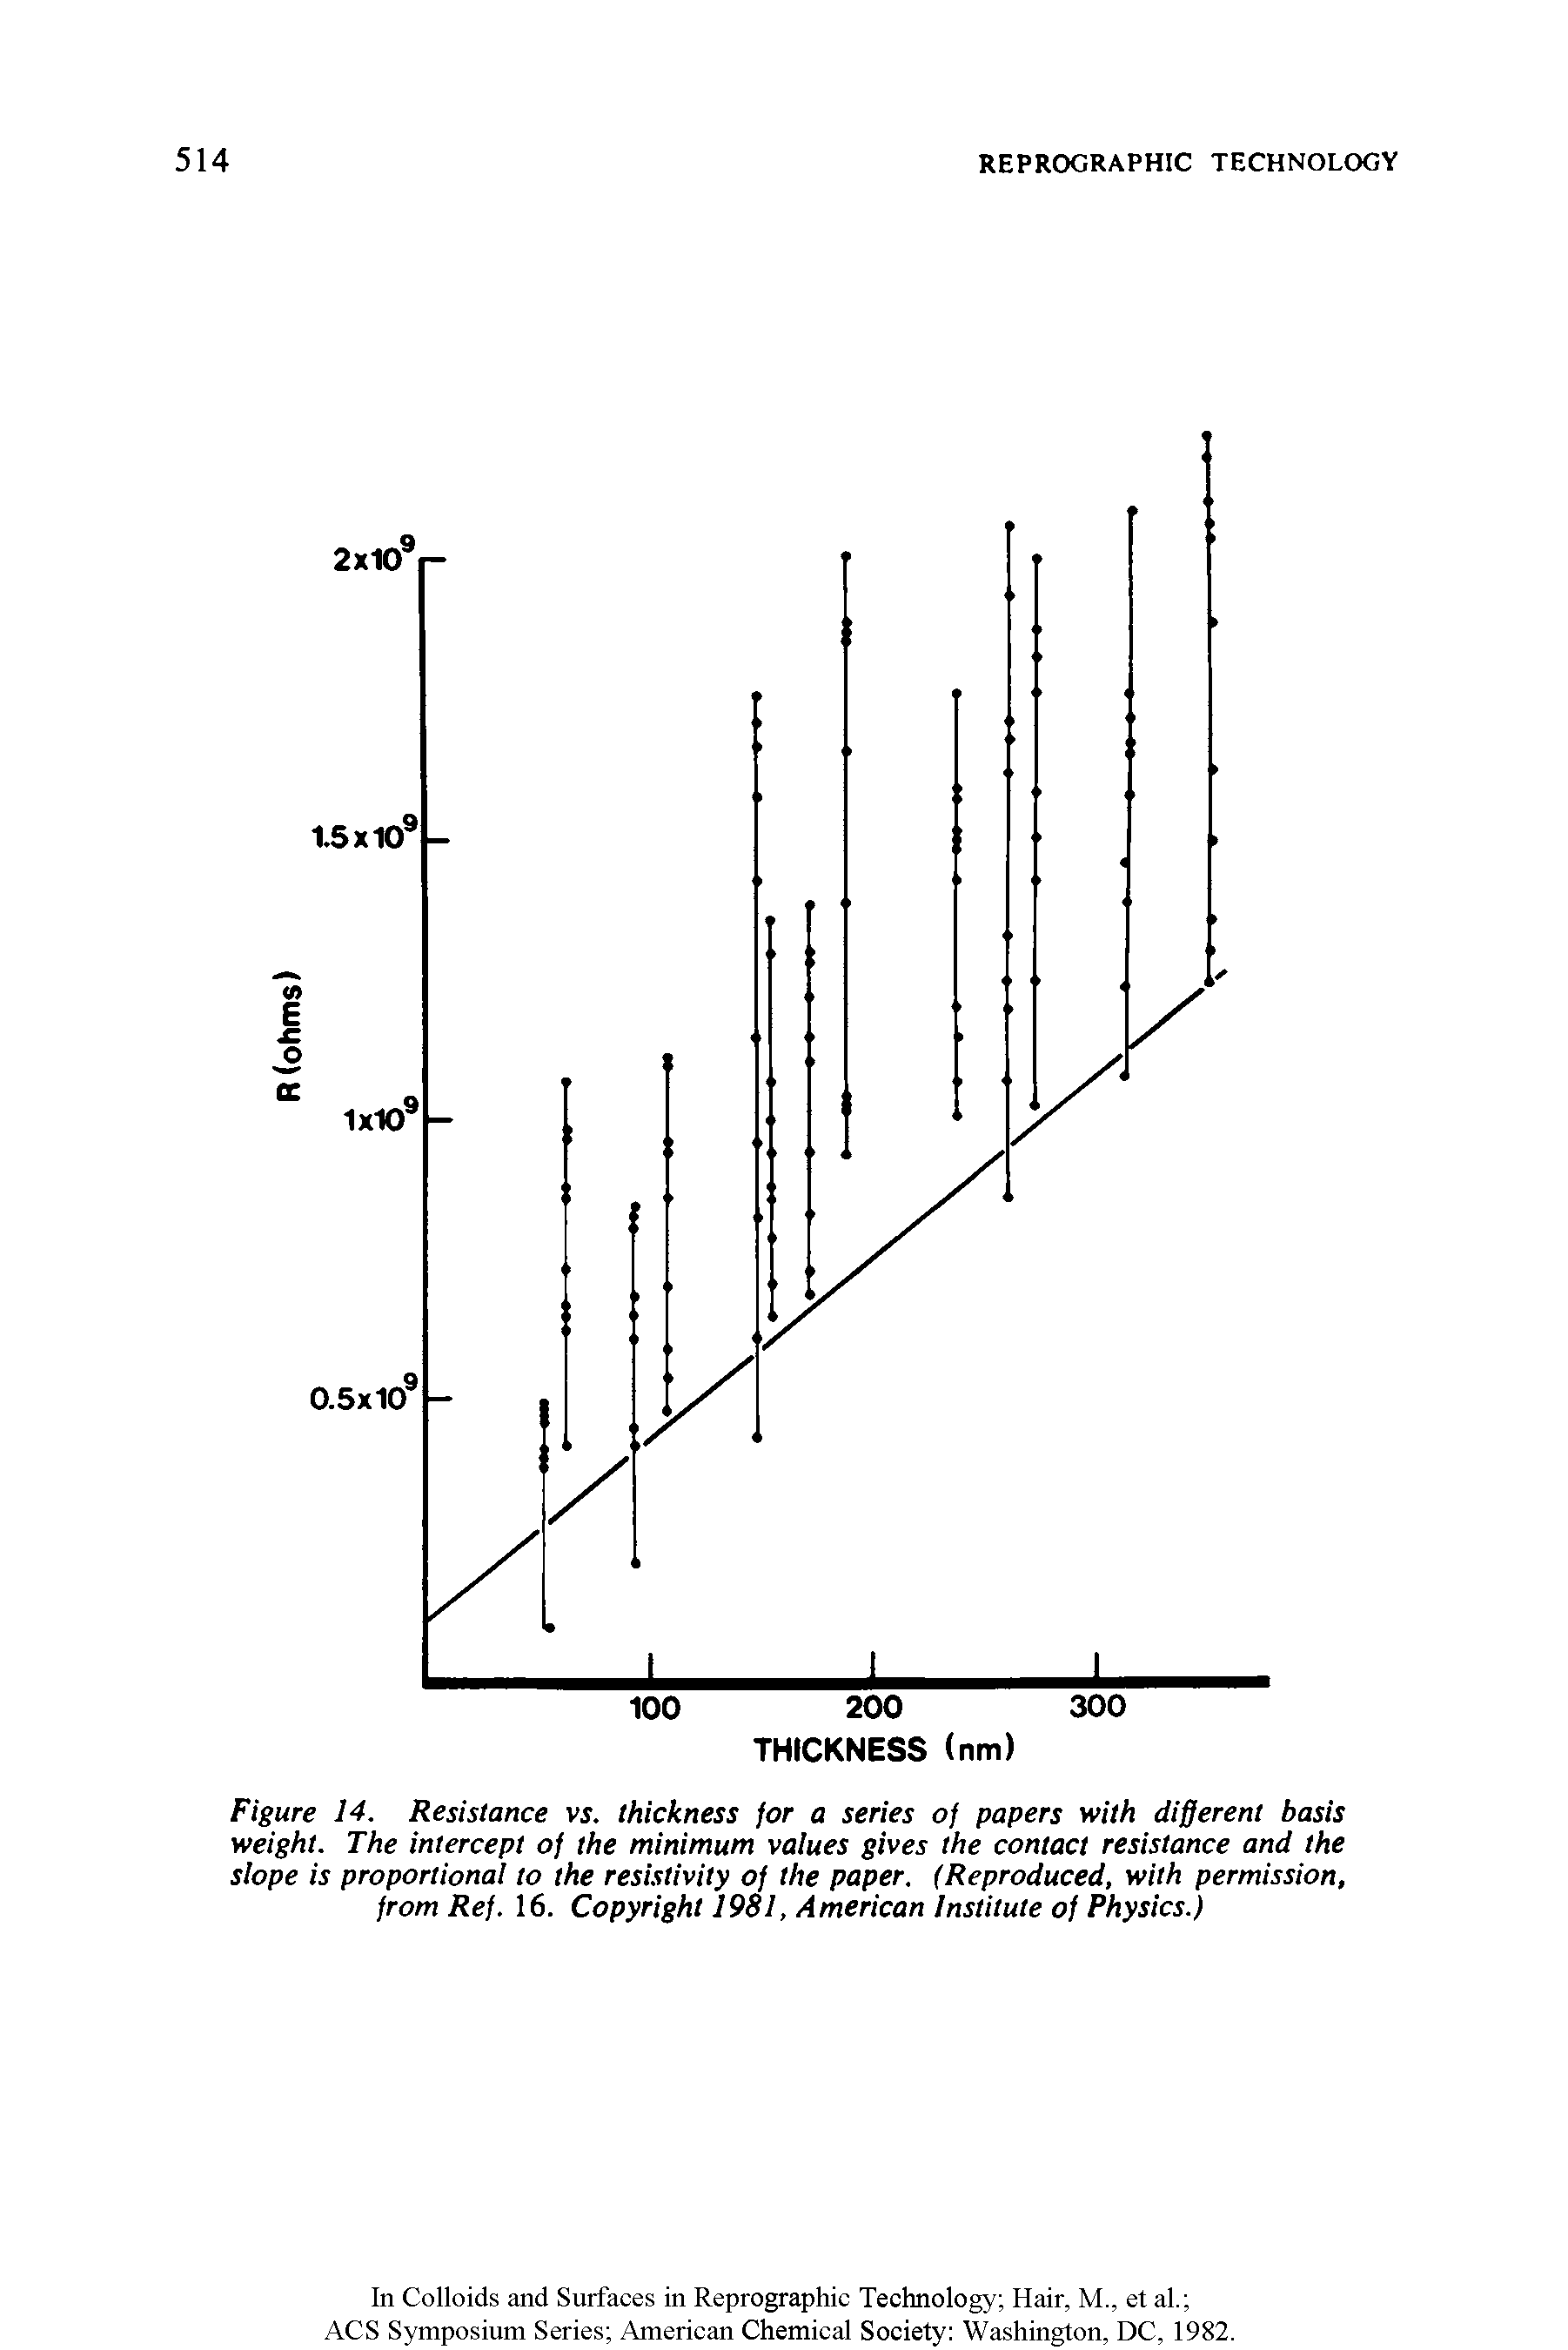 Figure 14. Resistance vs. thickness for a series of papers with different basis weight. The intercept of the minimum values gives the contact resistance and the slope is proportional to the resistivity of the paper. (Reproduced, with permission, from Ref. 16. Copyright 1981, American Institute of Physics.)...